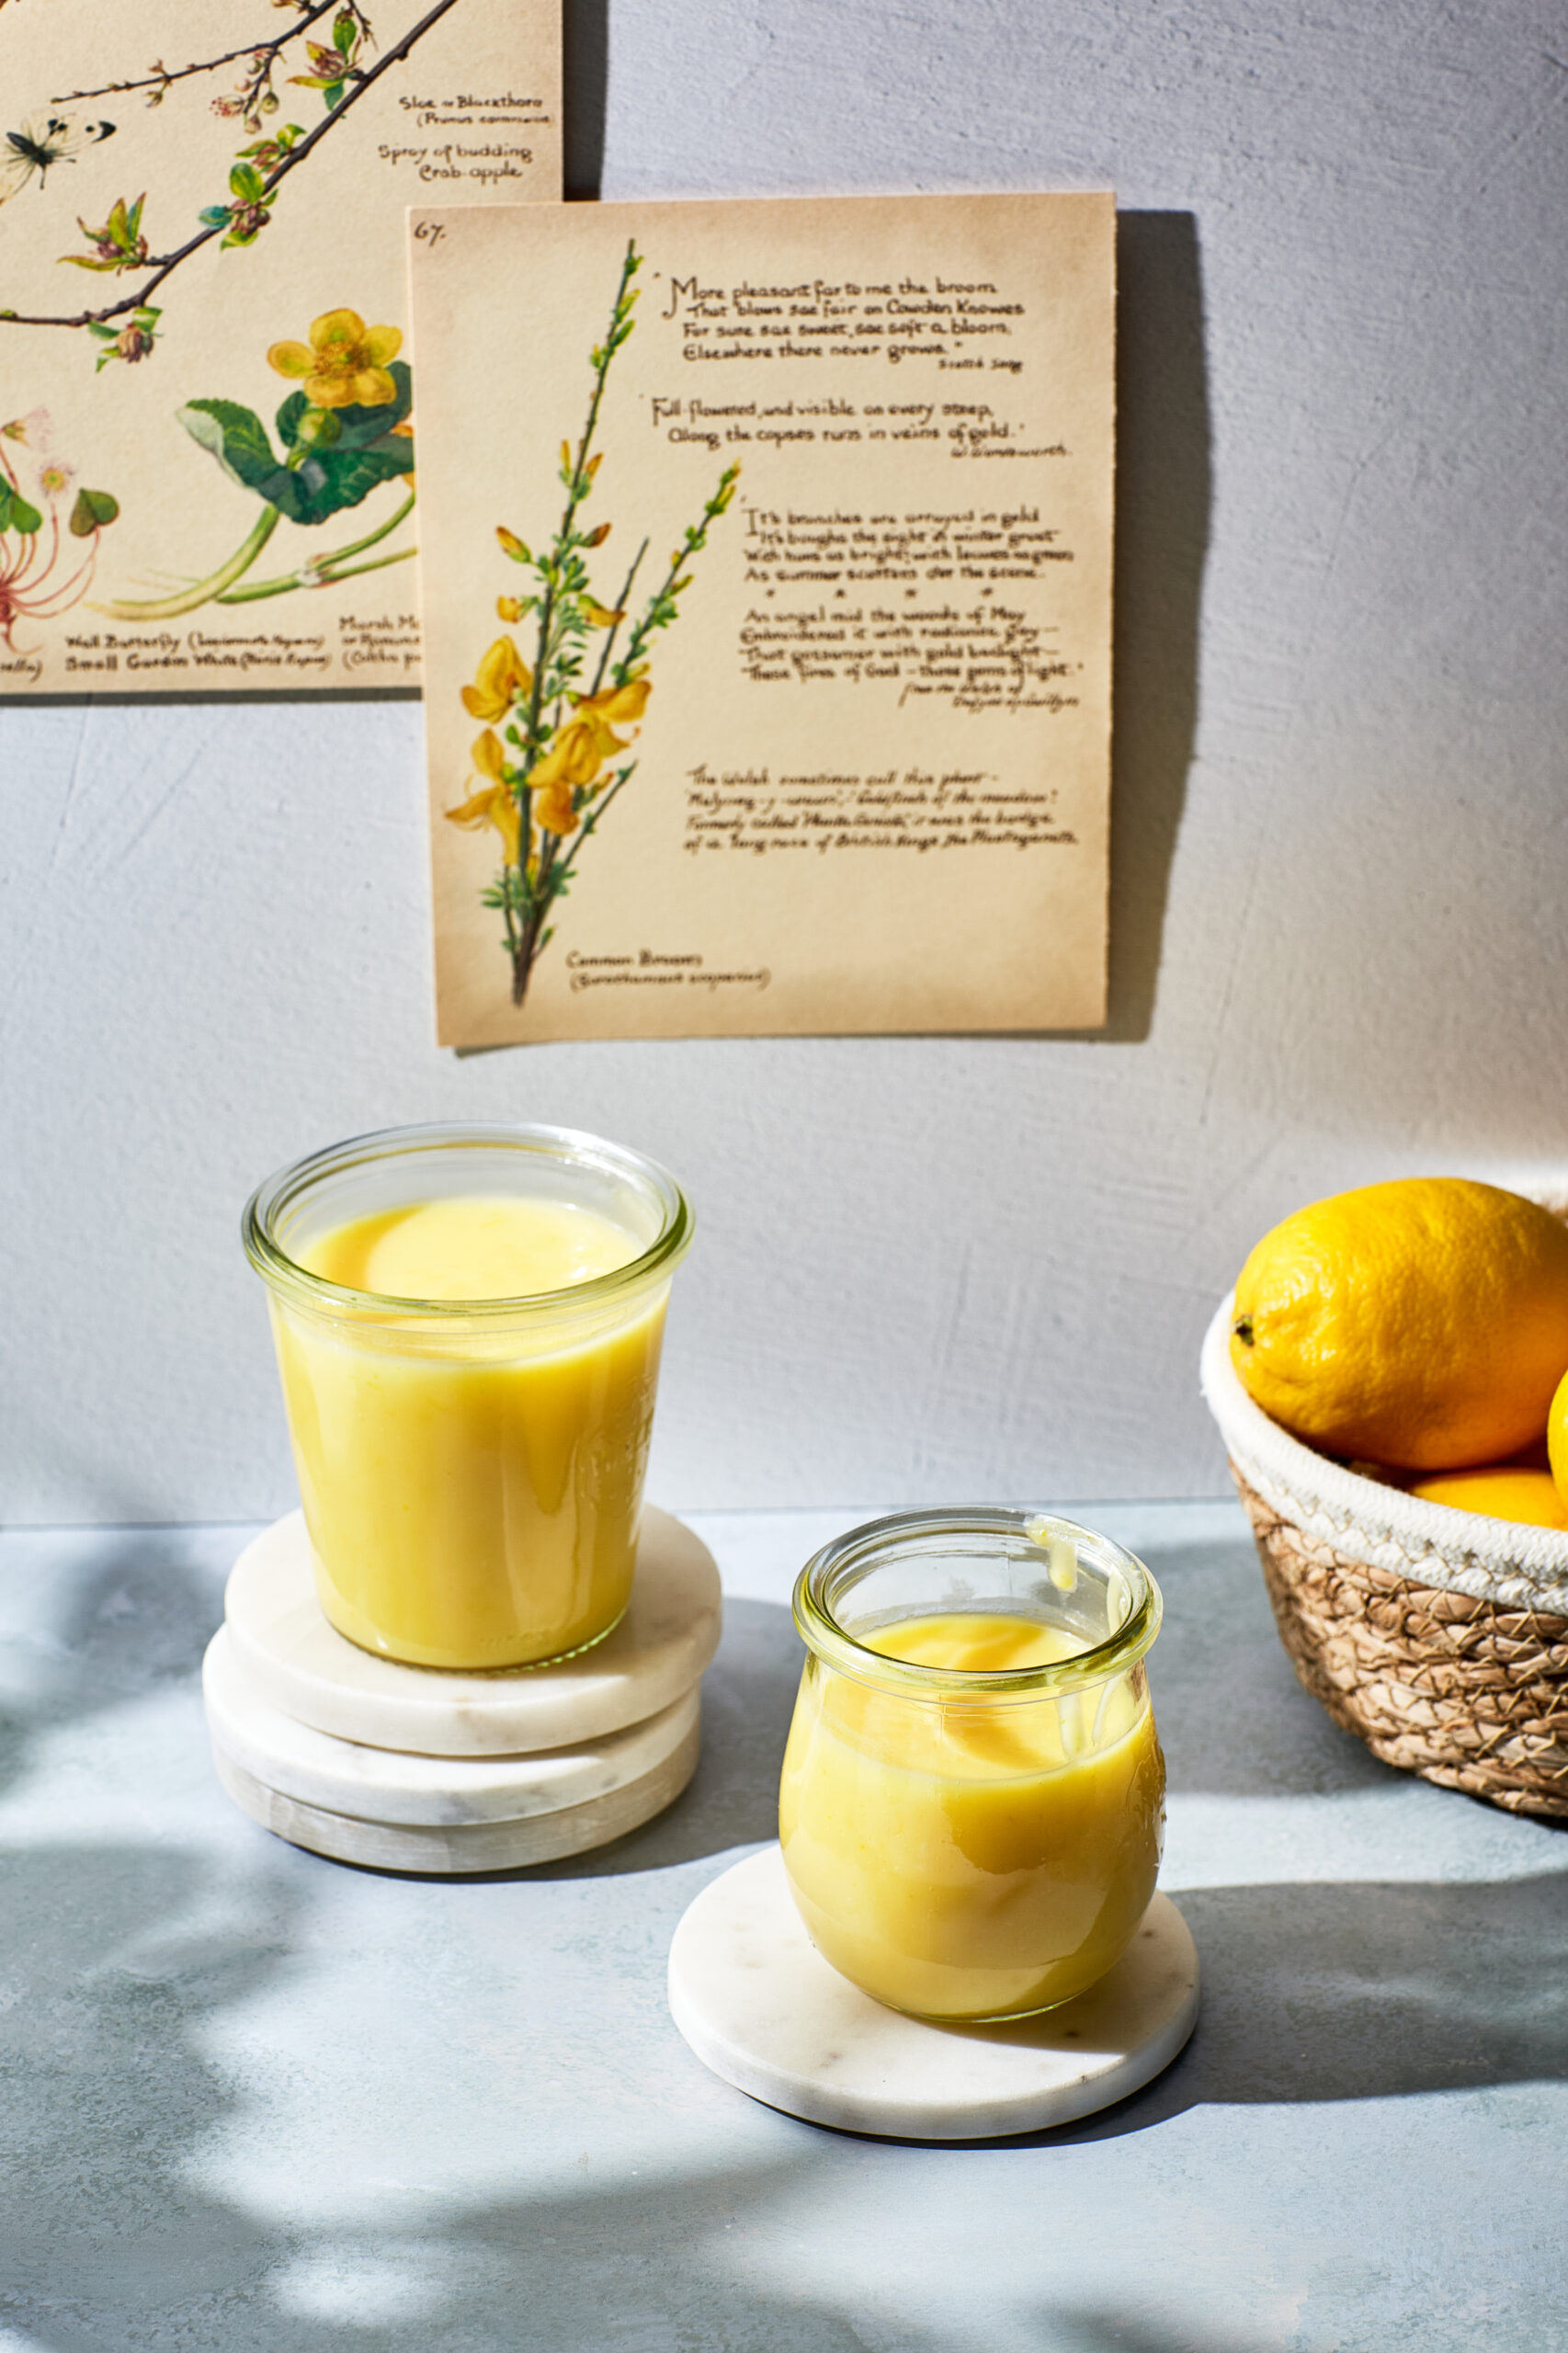 Two jars of microwave lemon curd in a sunny scene with lemons and old Edwardian book pages.